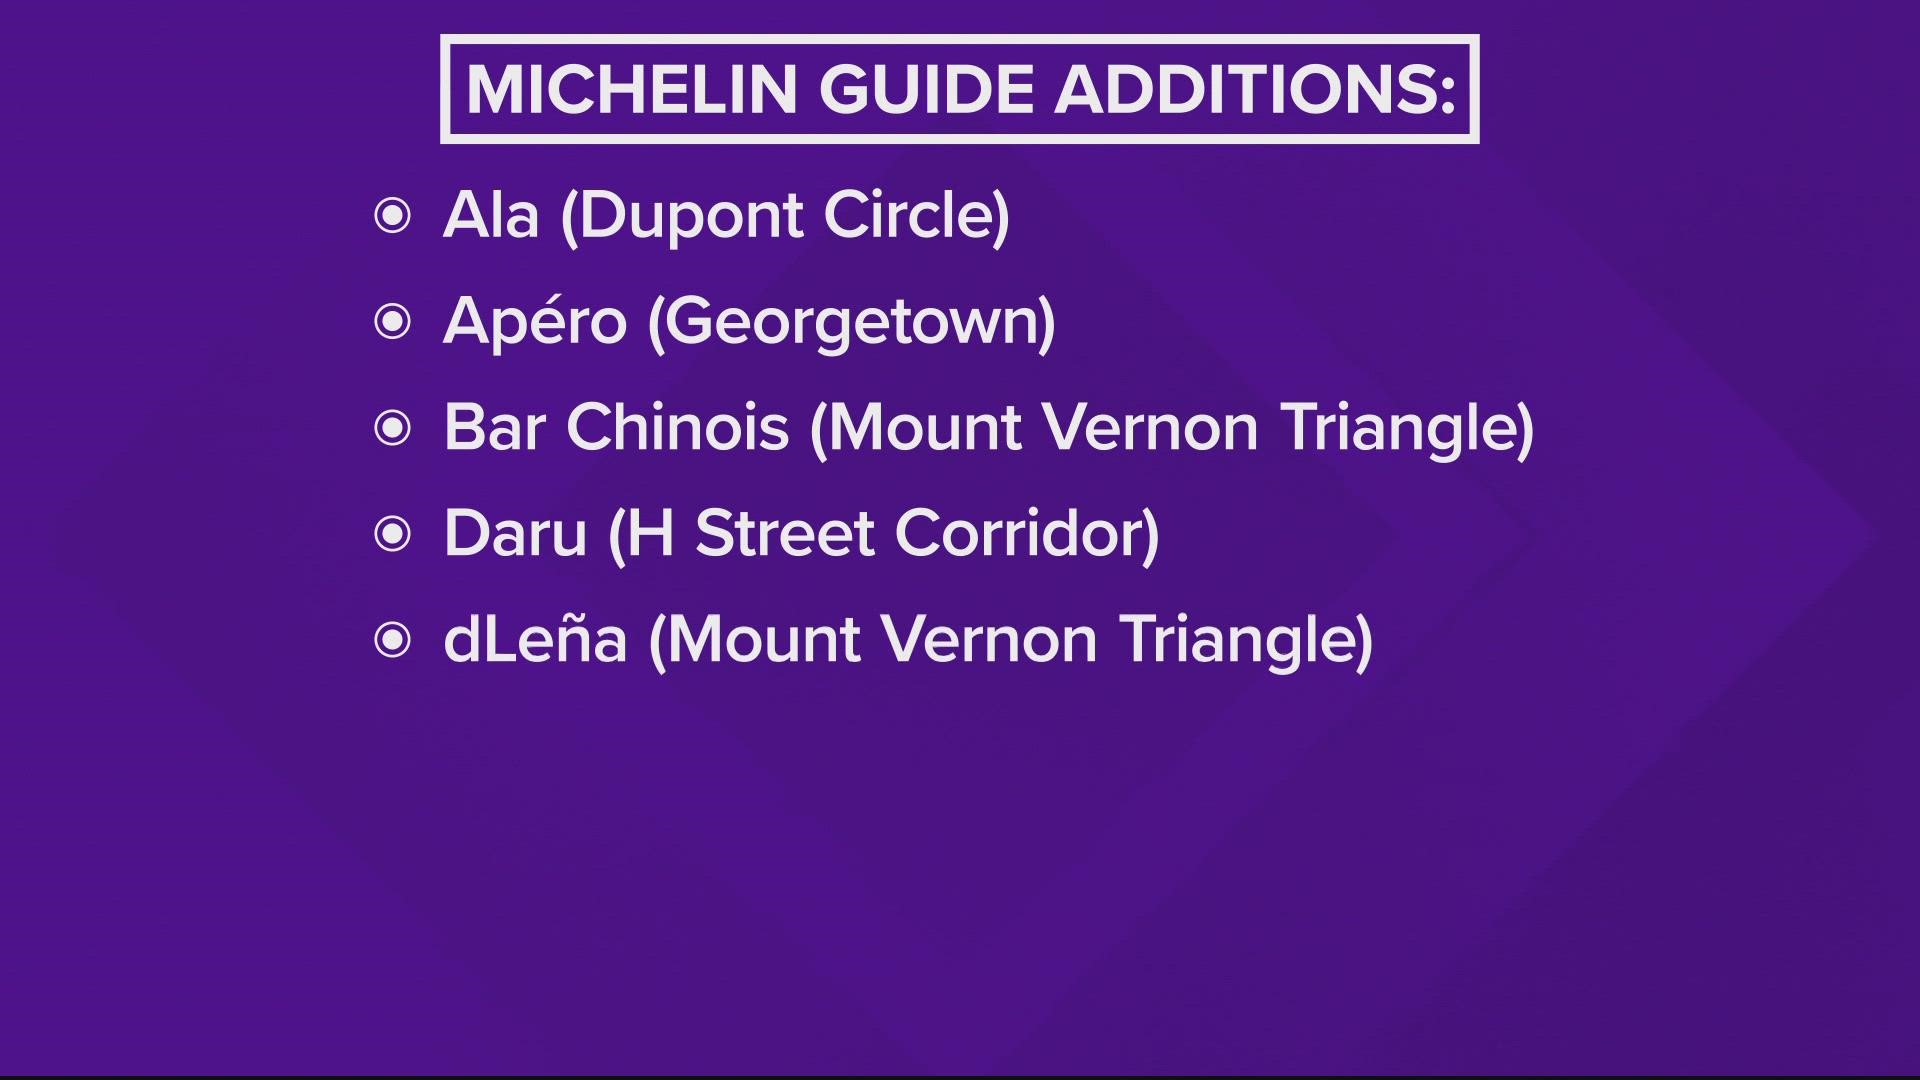 Sixteen new restaurants were added to the Michelin Guide's 2022 edition.